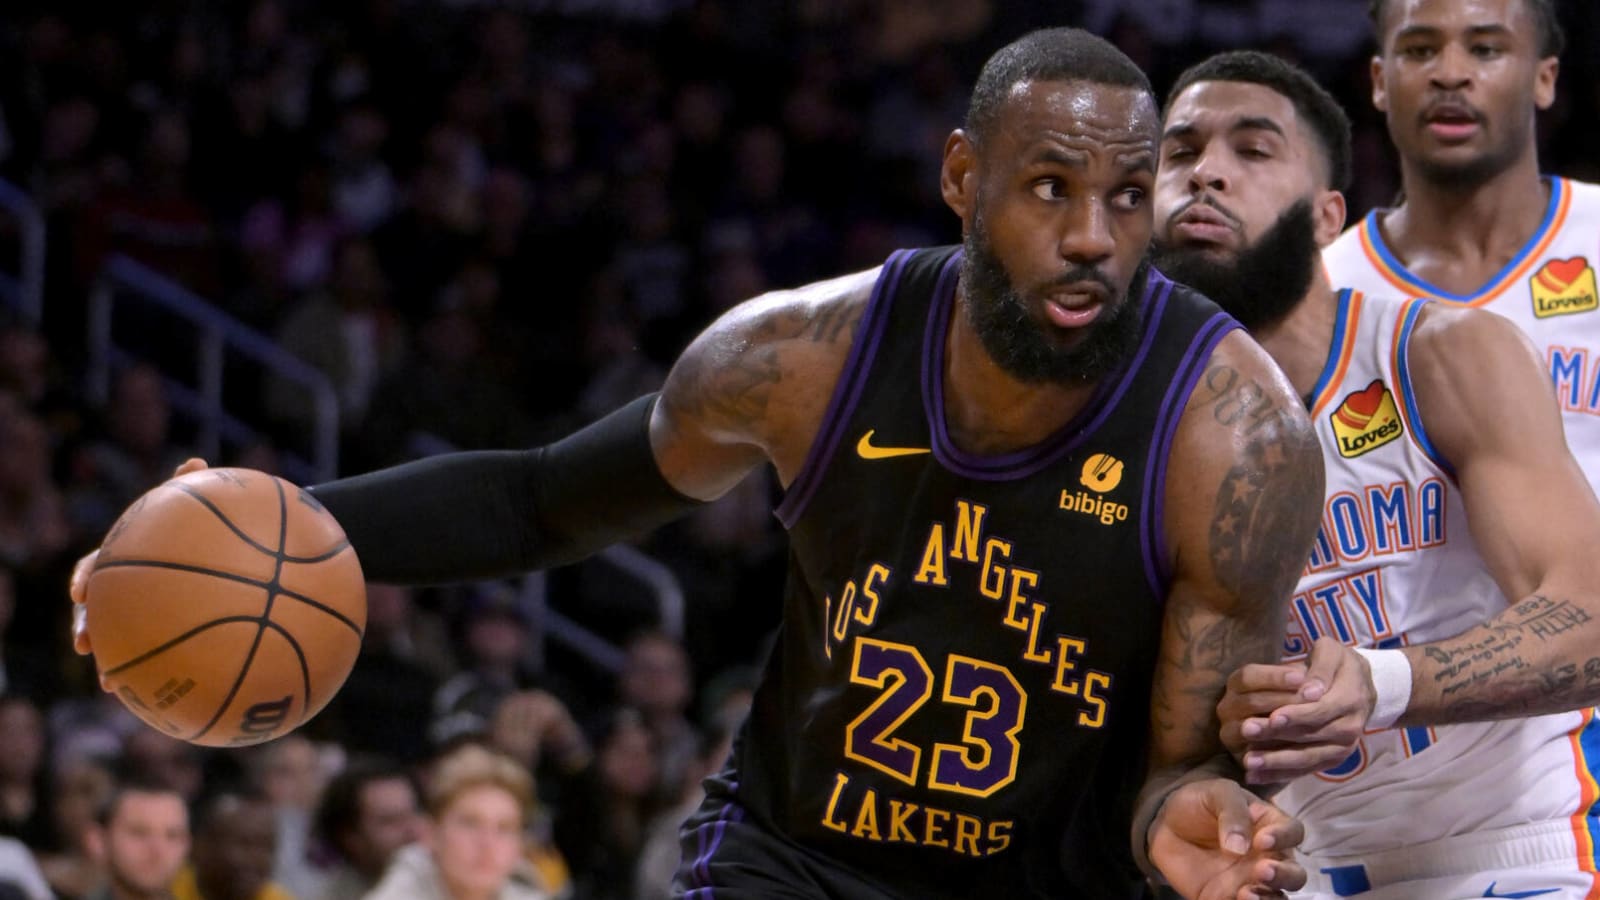 Watch: LeBron James gets fan kicked out of Lakers game